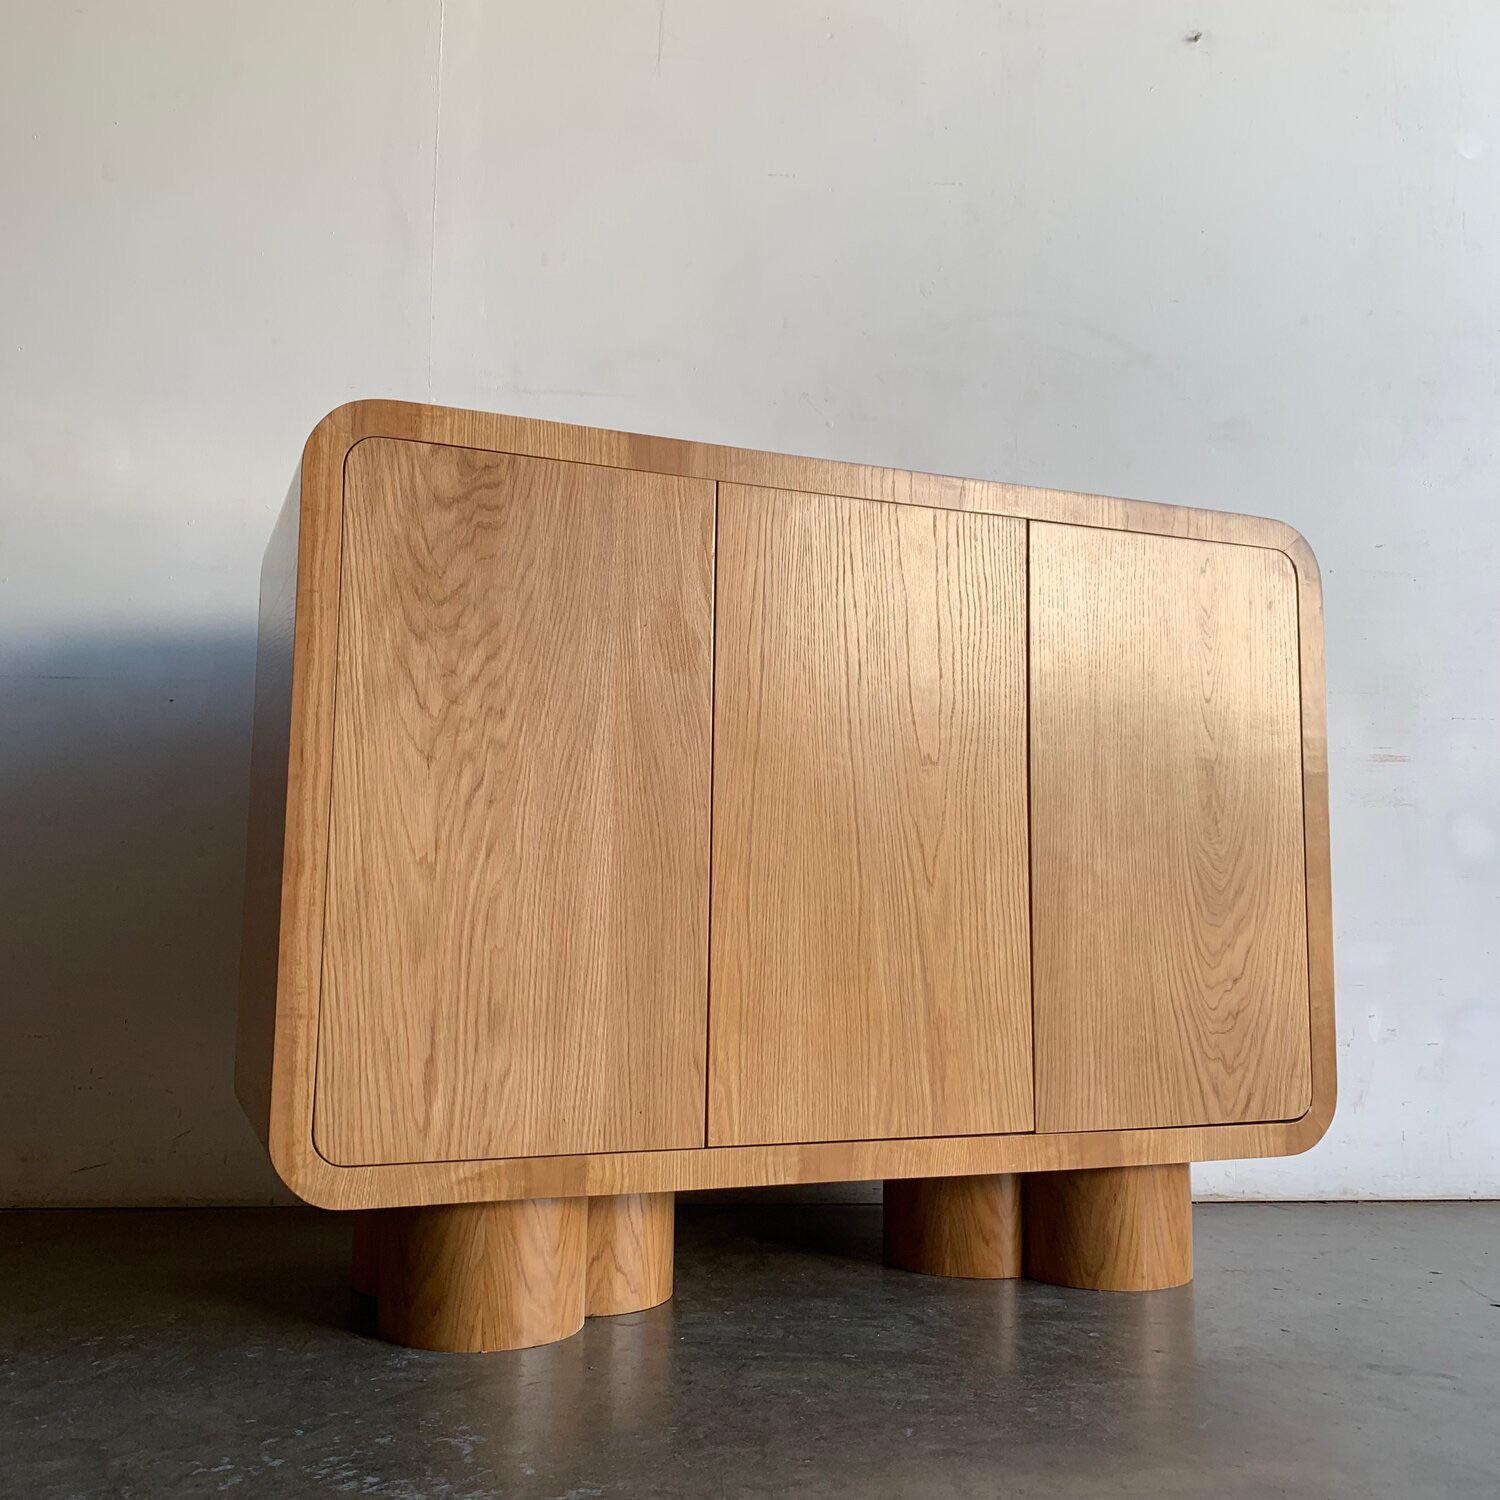 Made in house by Vintage On Point this large sideboard is made of solid and veneered white rift oak. This item features nice grain throughout, curved waterfall sides edges, sits on three merged cylinder legs, and has push open doors. 
These